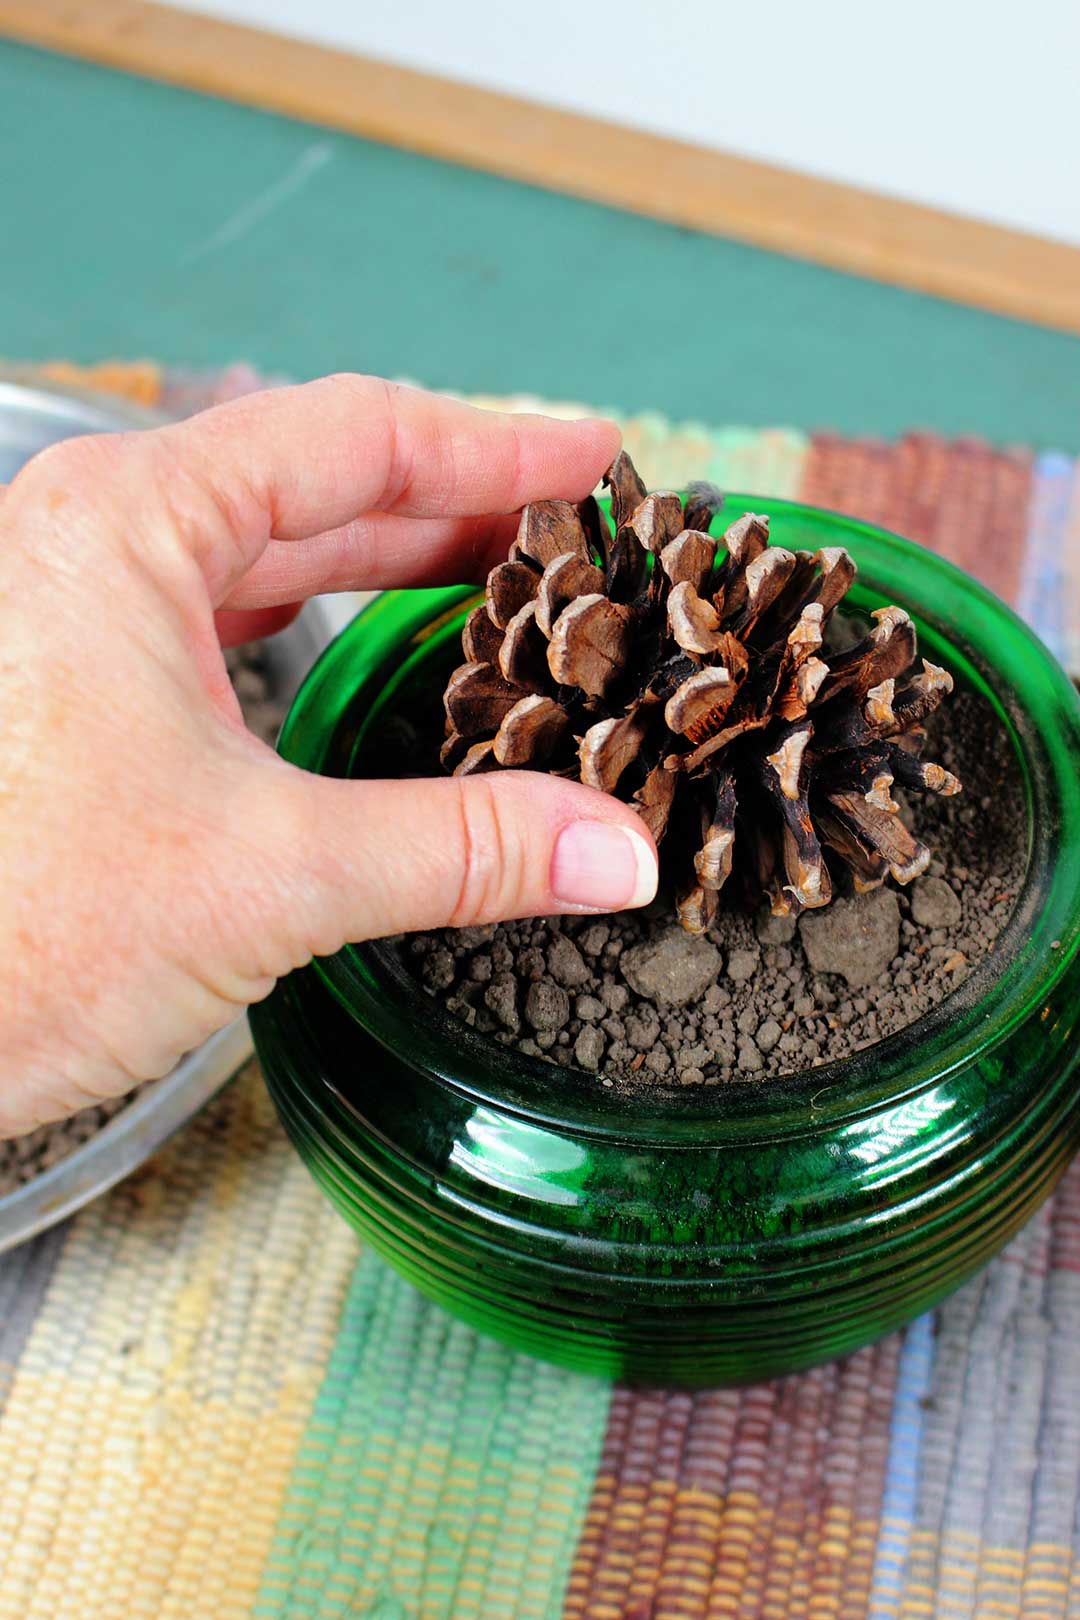 Hand placing pinecone on dirt in green glass pot.
